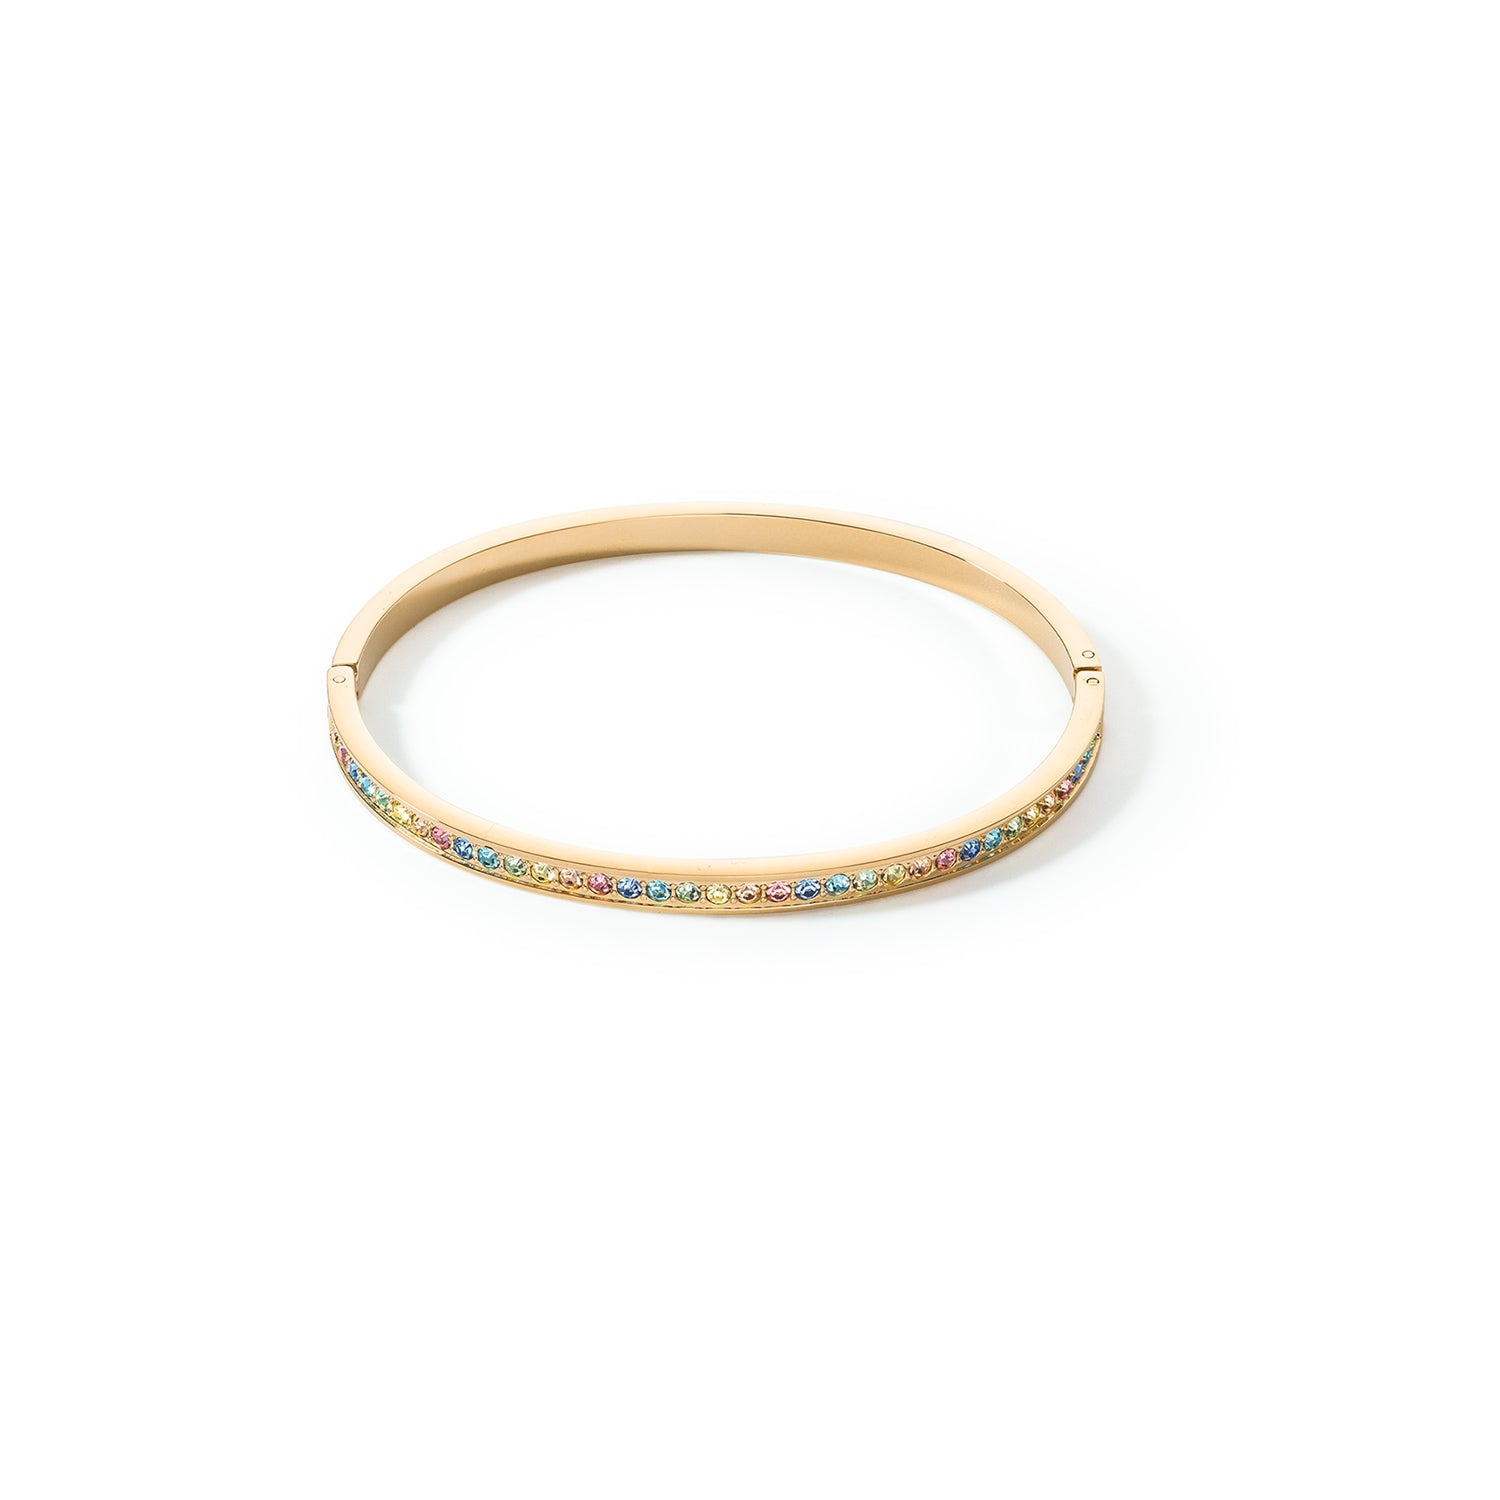 Pastel Rainbow crystal bangle gold plated stainless steel 0127_1590